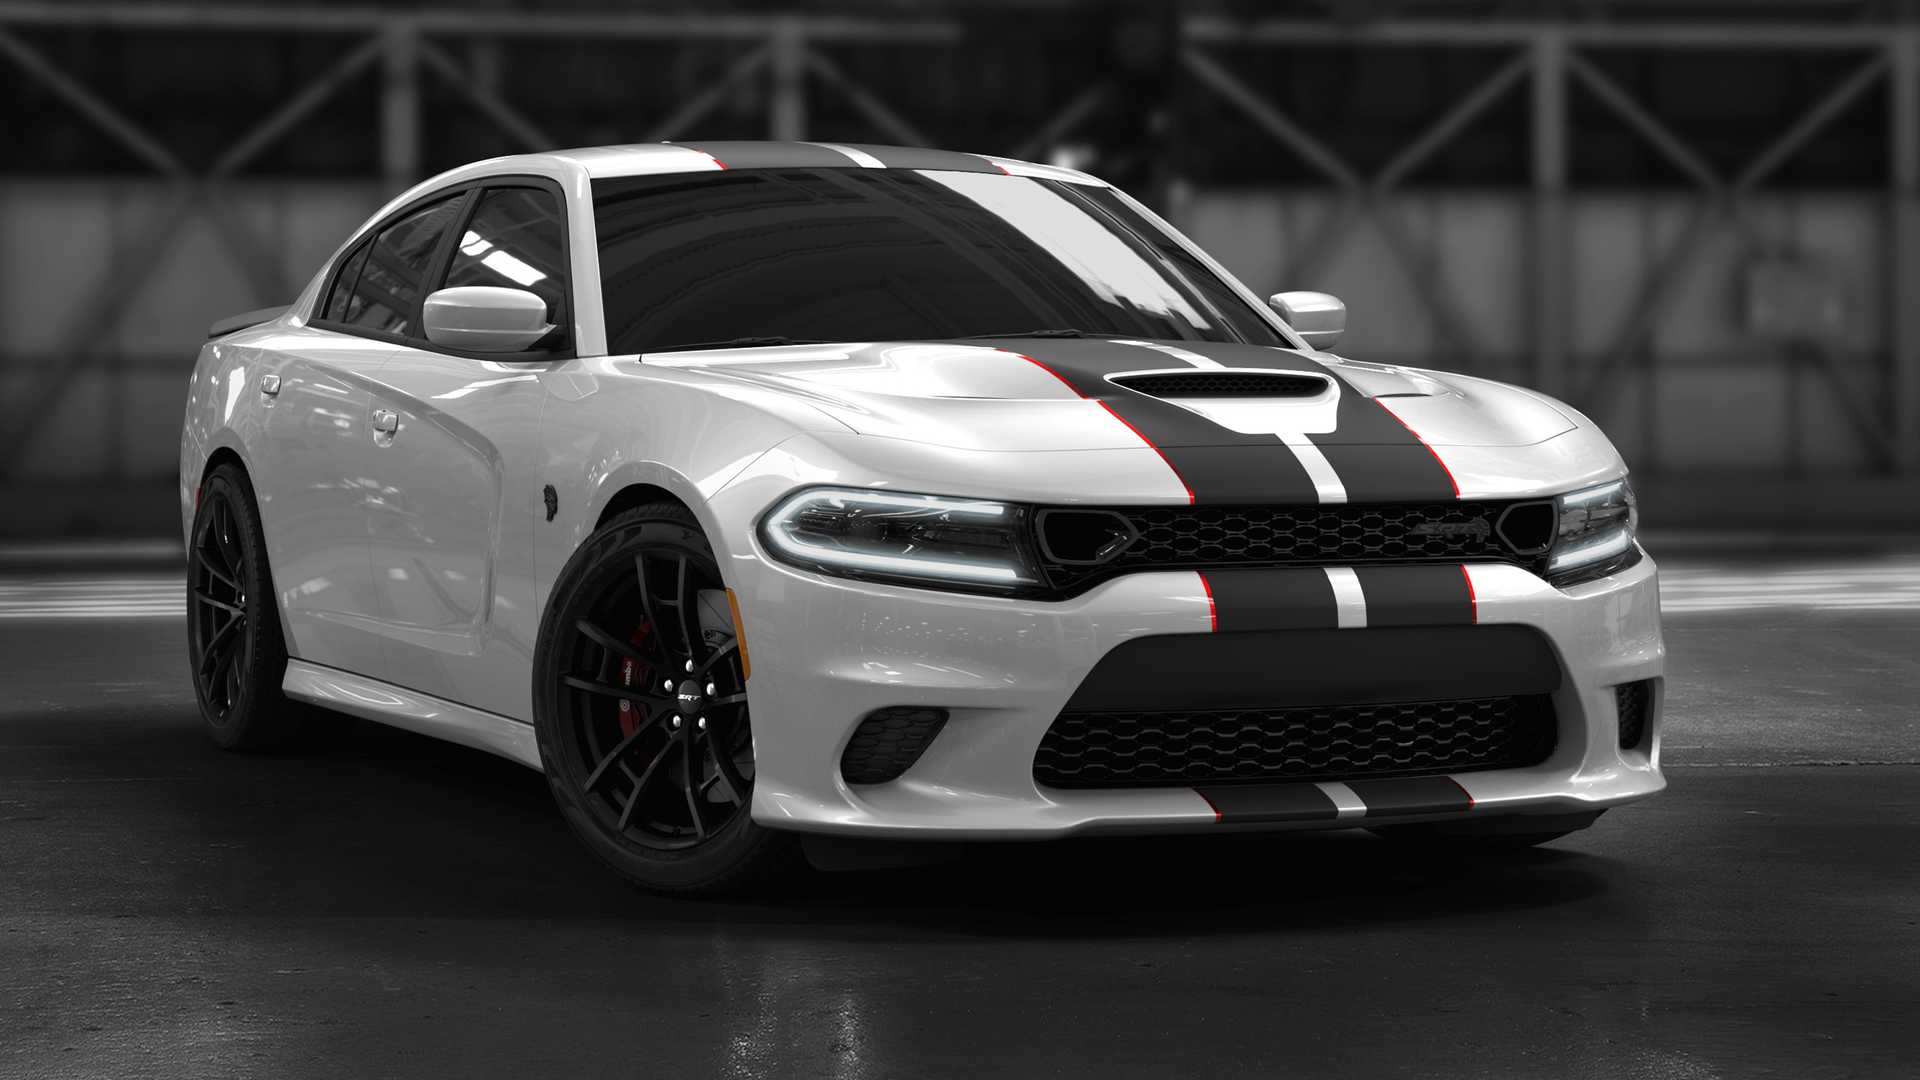 2019 Dodge Charger SRT Hellcat Octane Edition Wallpapers 9 HD